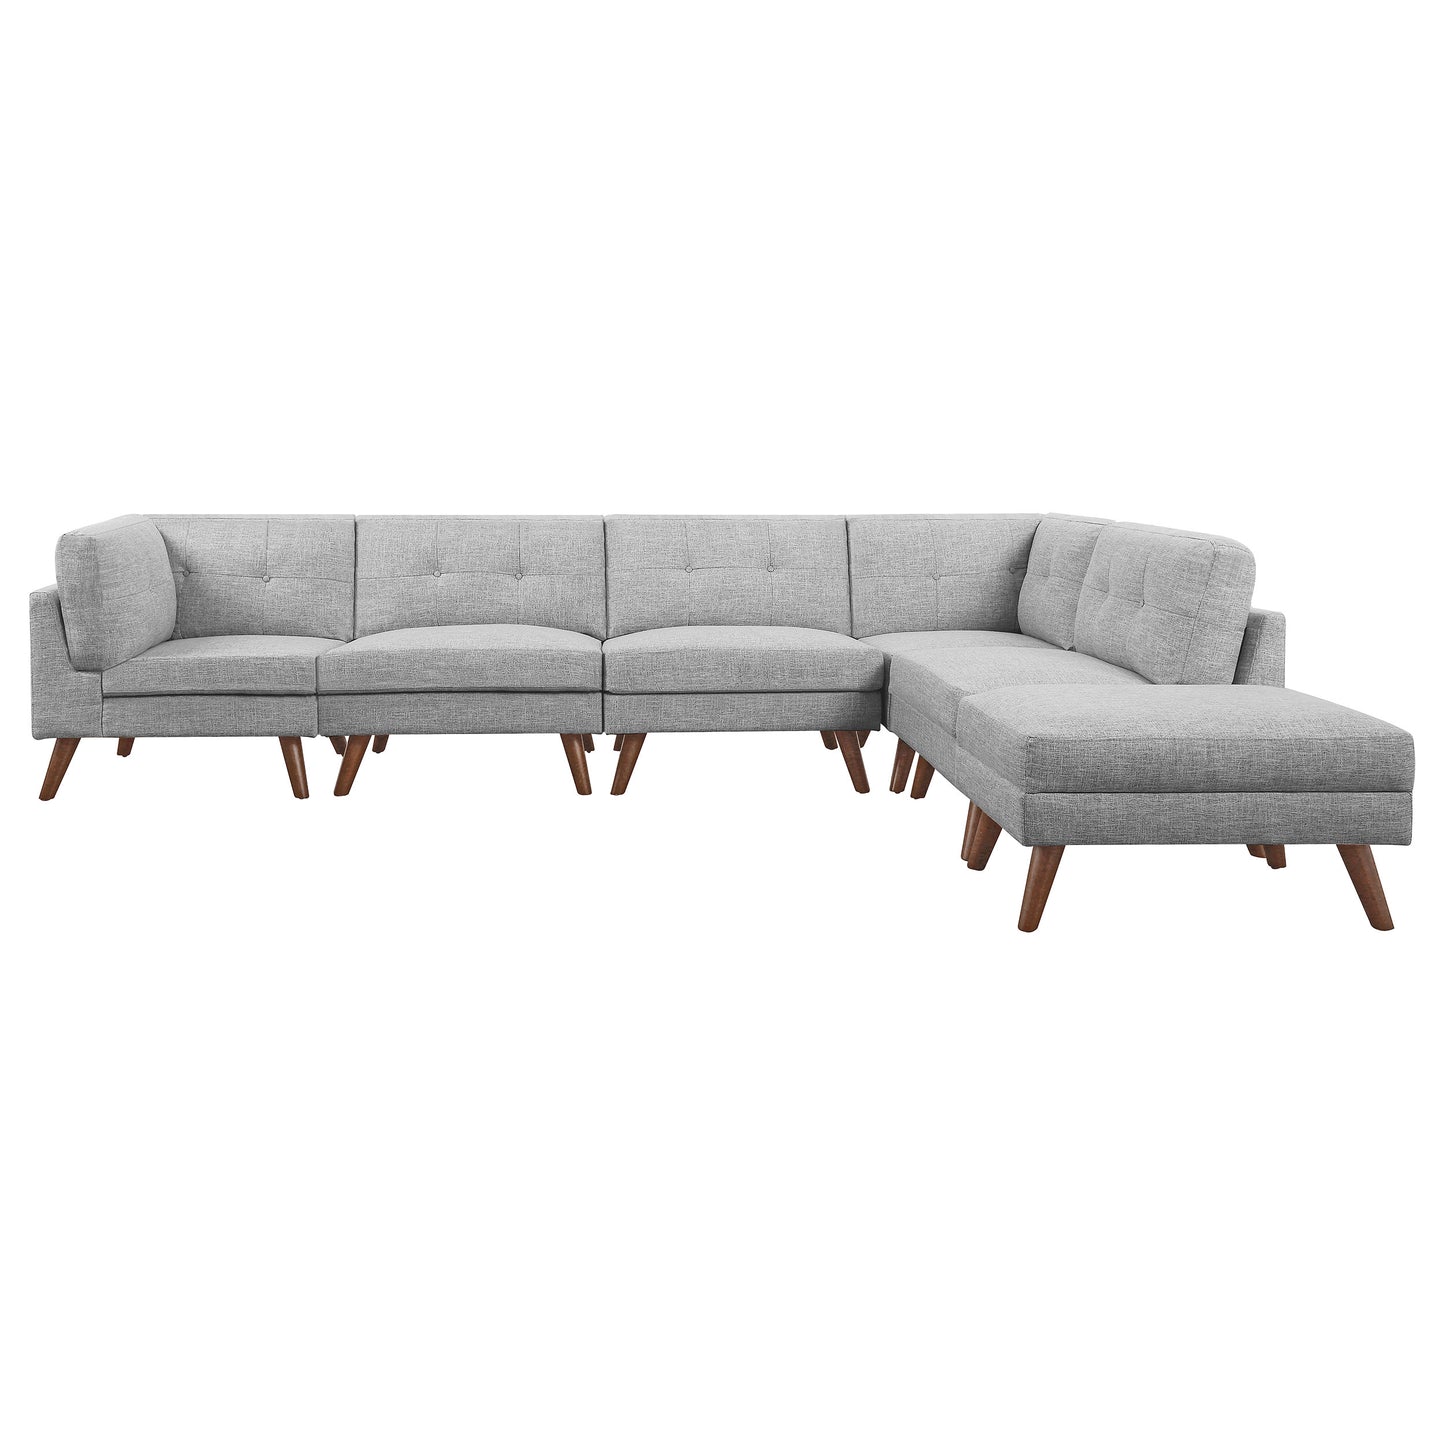 Churchill 6-piece Upholstered Modular Tufted Sectional Grey and Walnut